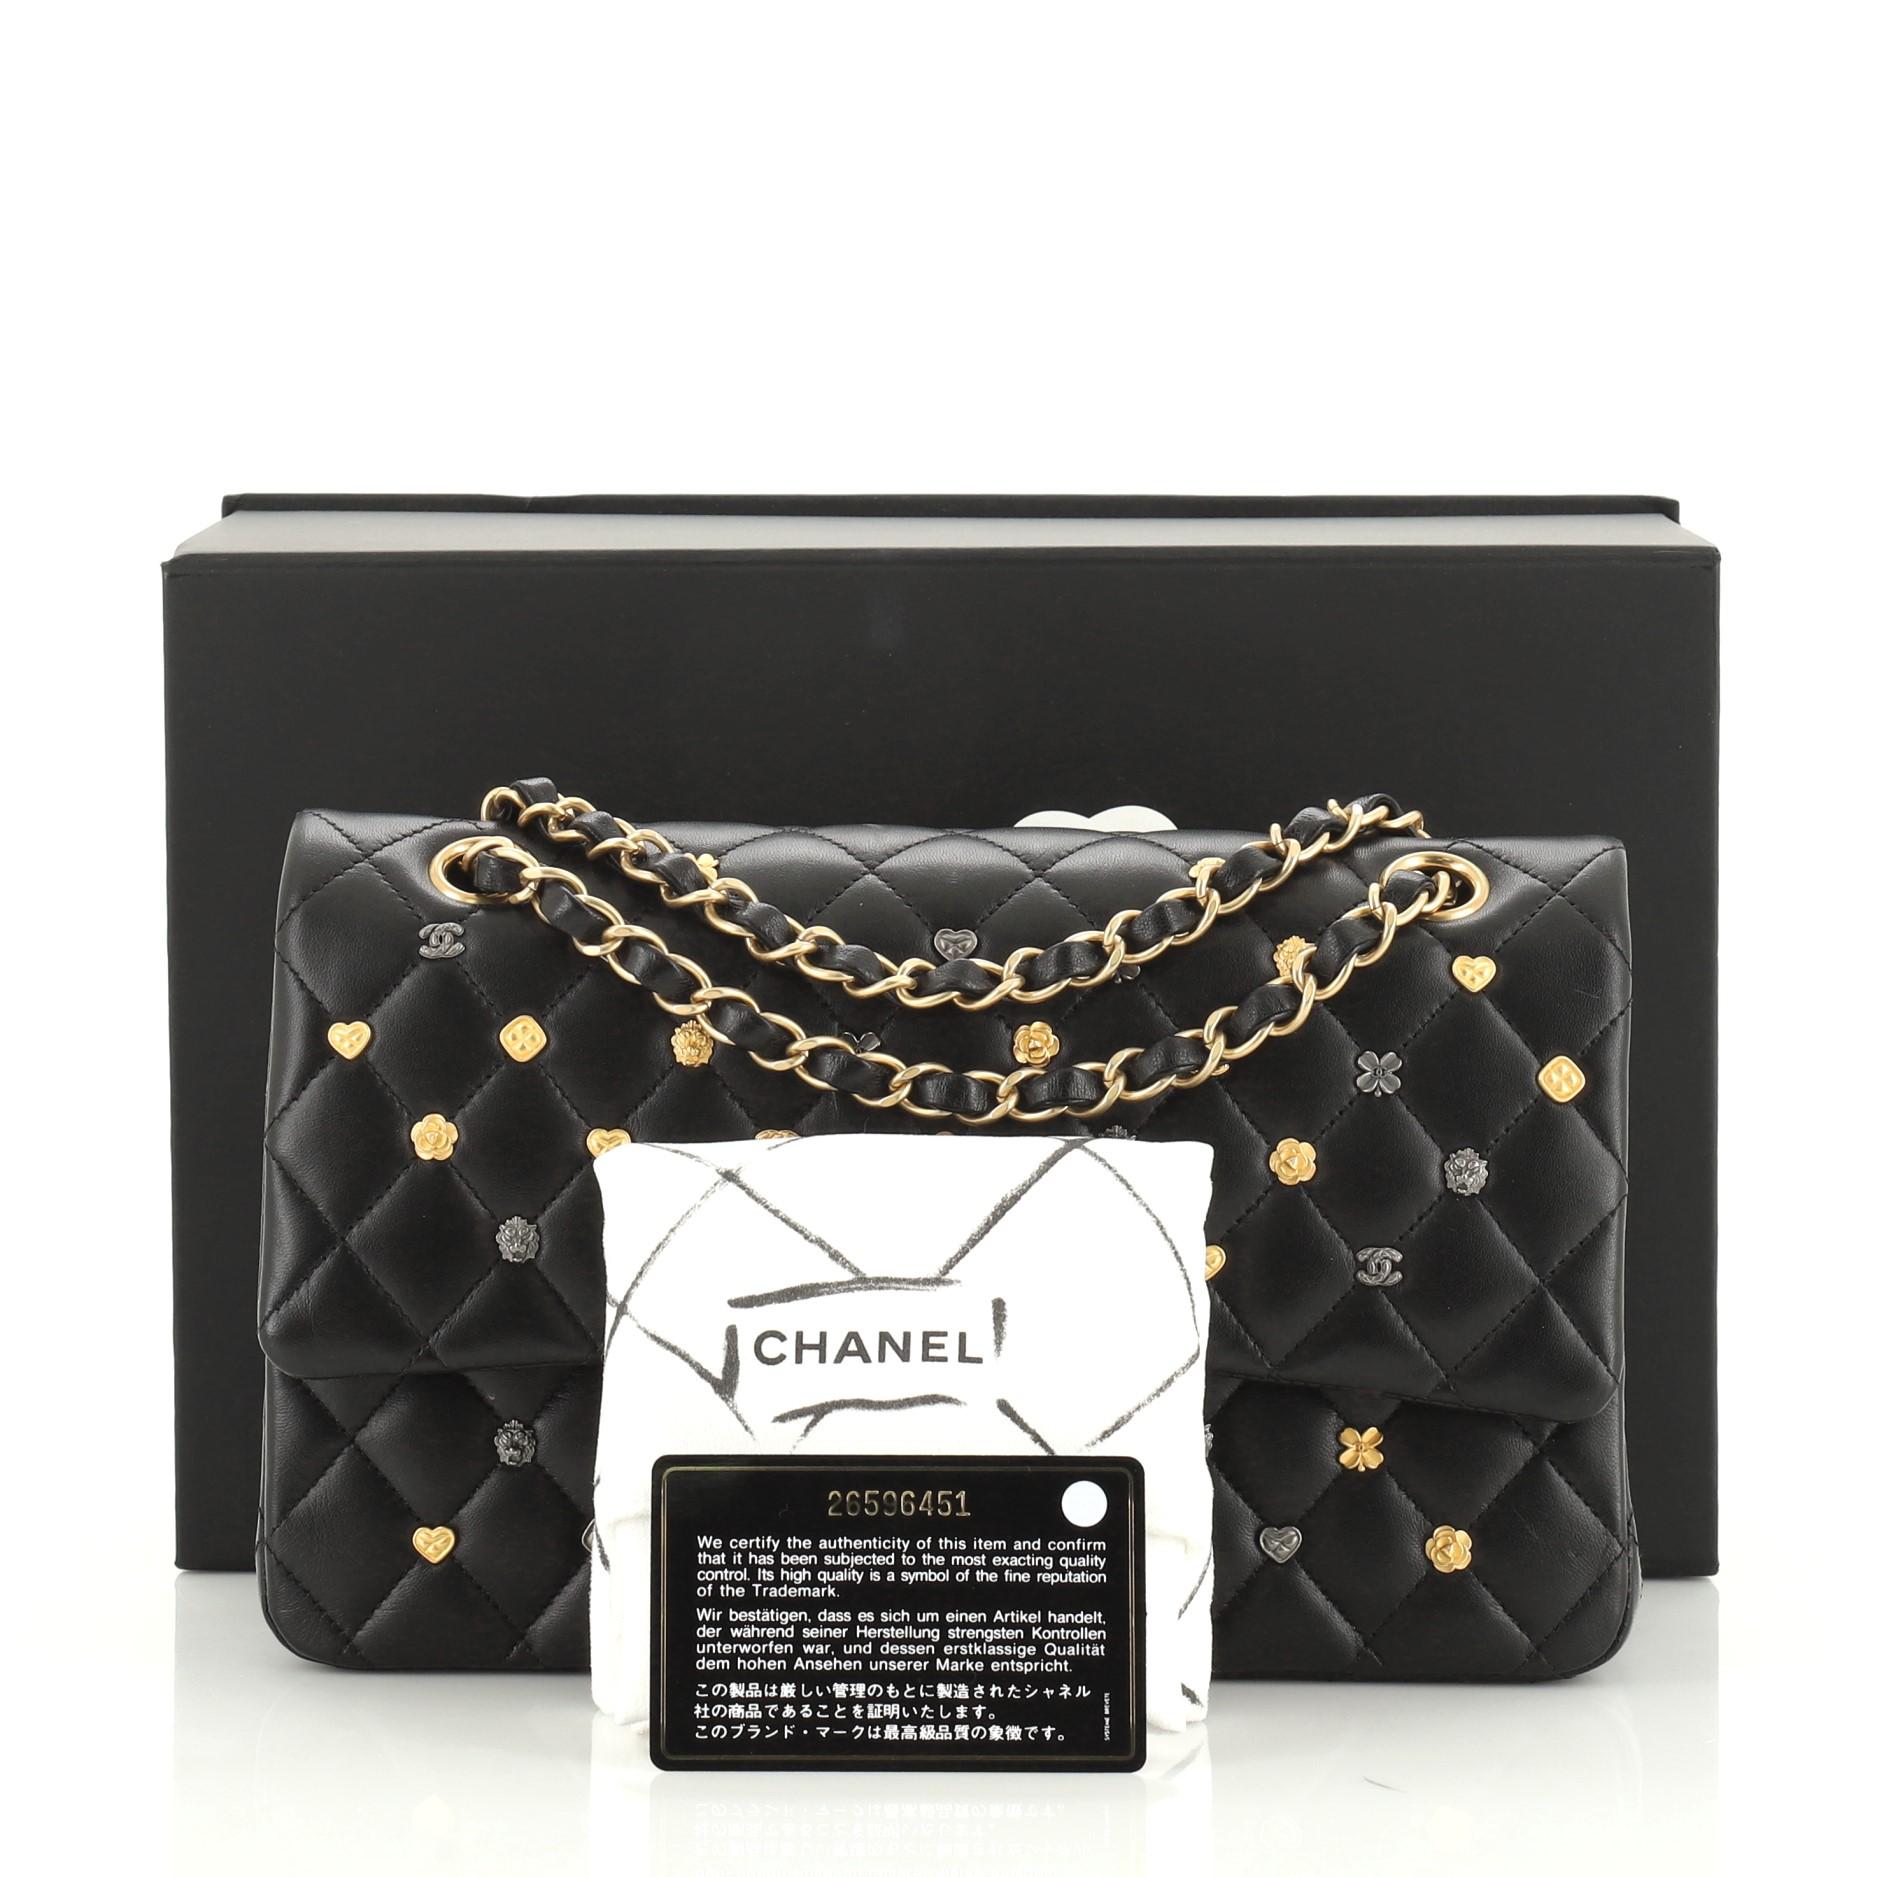 This Chanel 18K Charms Classic Double Flap Bag Quilted Lambskin Medium, crafted in black quilted lambskin leather, features woven-in leather chain link strap, decorated with various charms like the tiny hearts, Camellia flowers and the classic CC